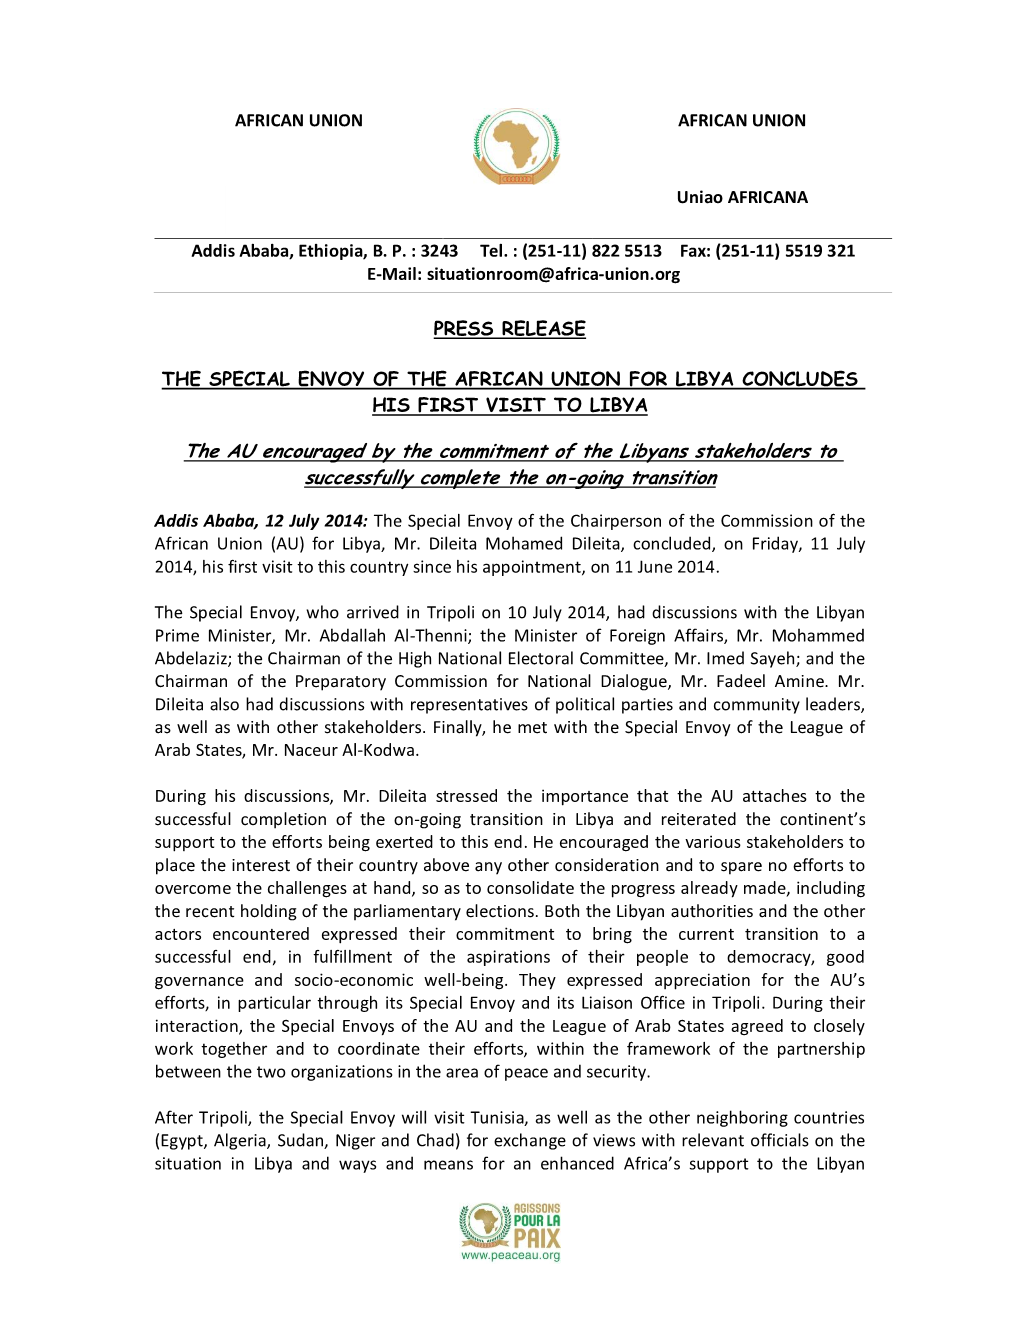 The AU Encouraged by the Commitment of the Libyans Stakeholders to Successfully Complete the On-Going Transition